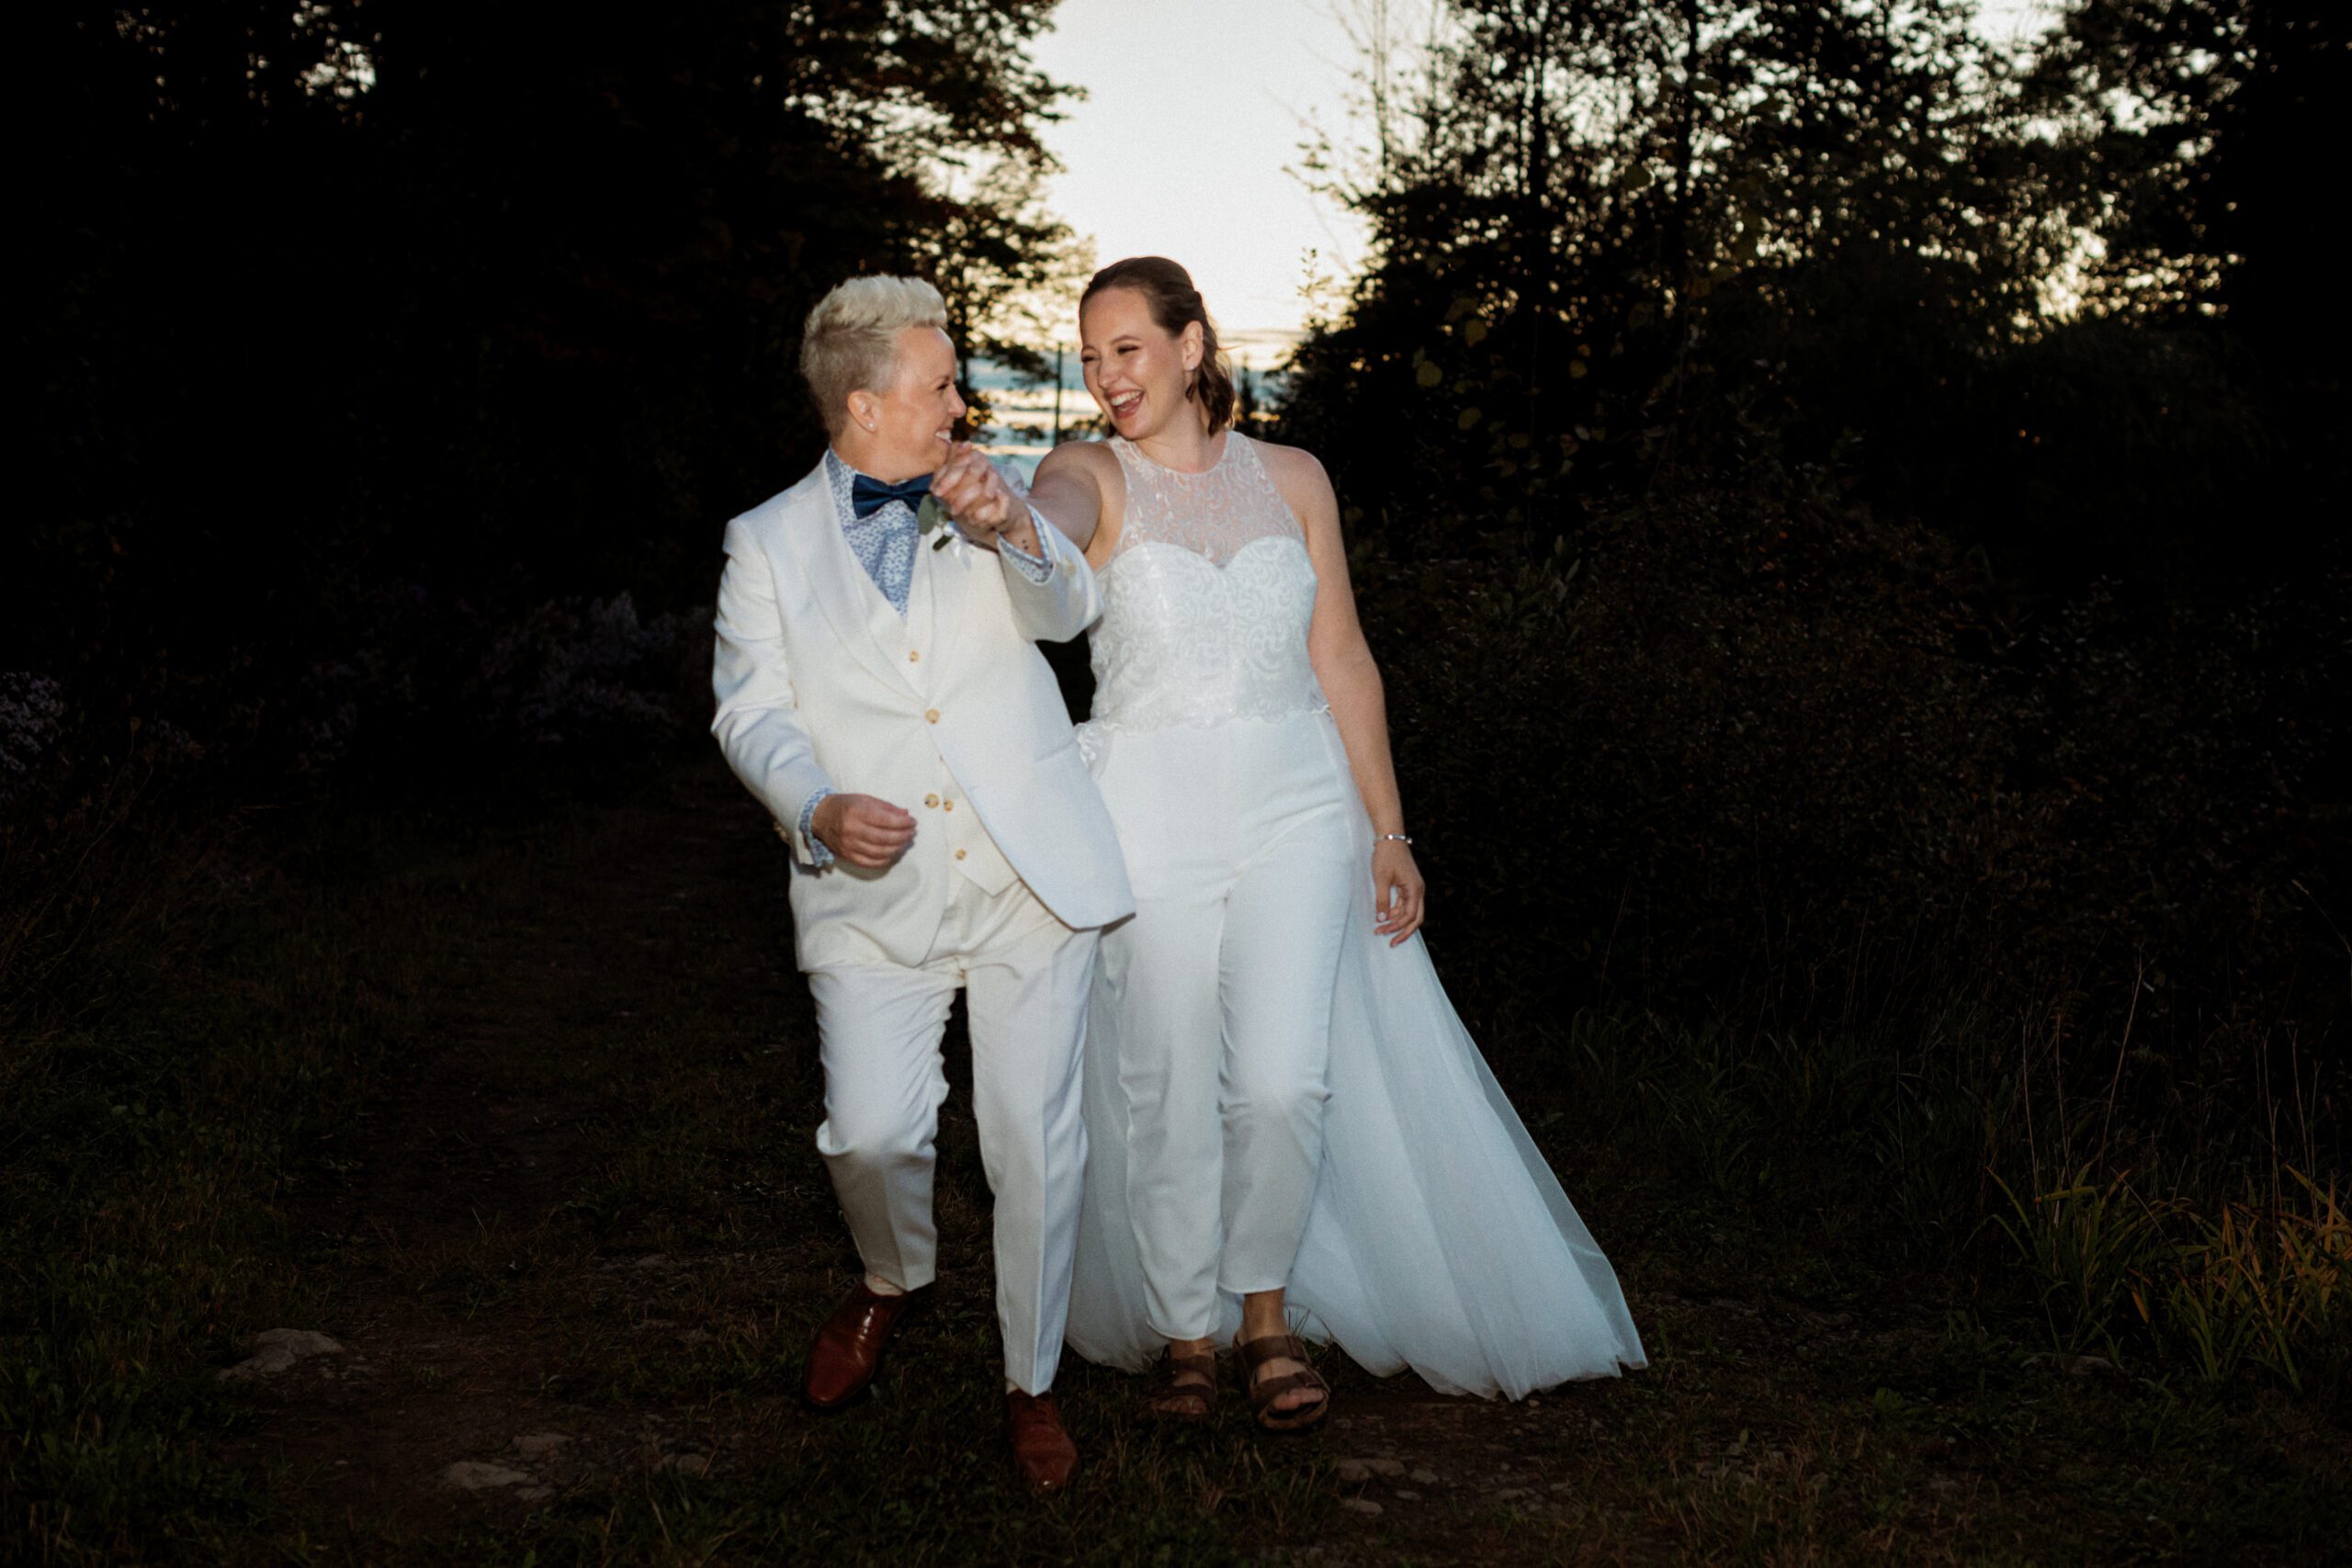 Shannon and Stacey walking in the dusk light on their Metcalfe backyard wedding day